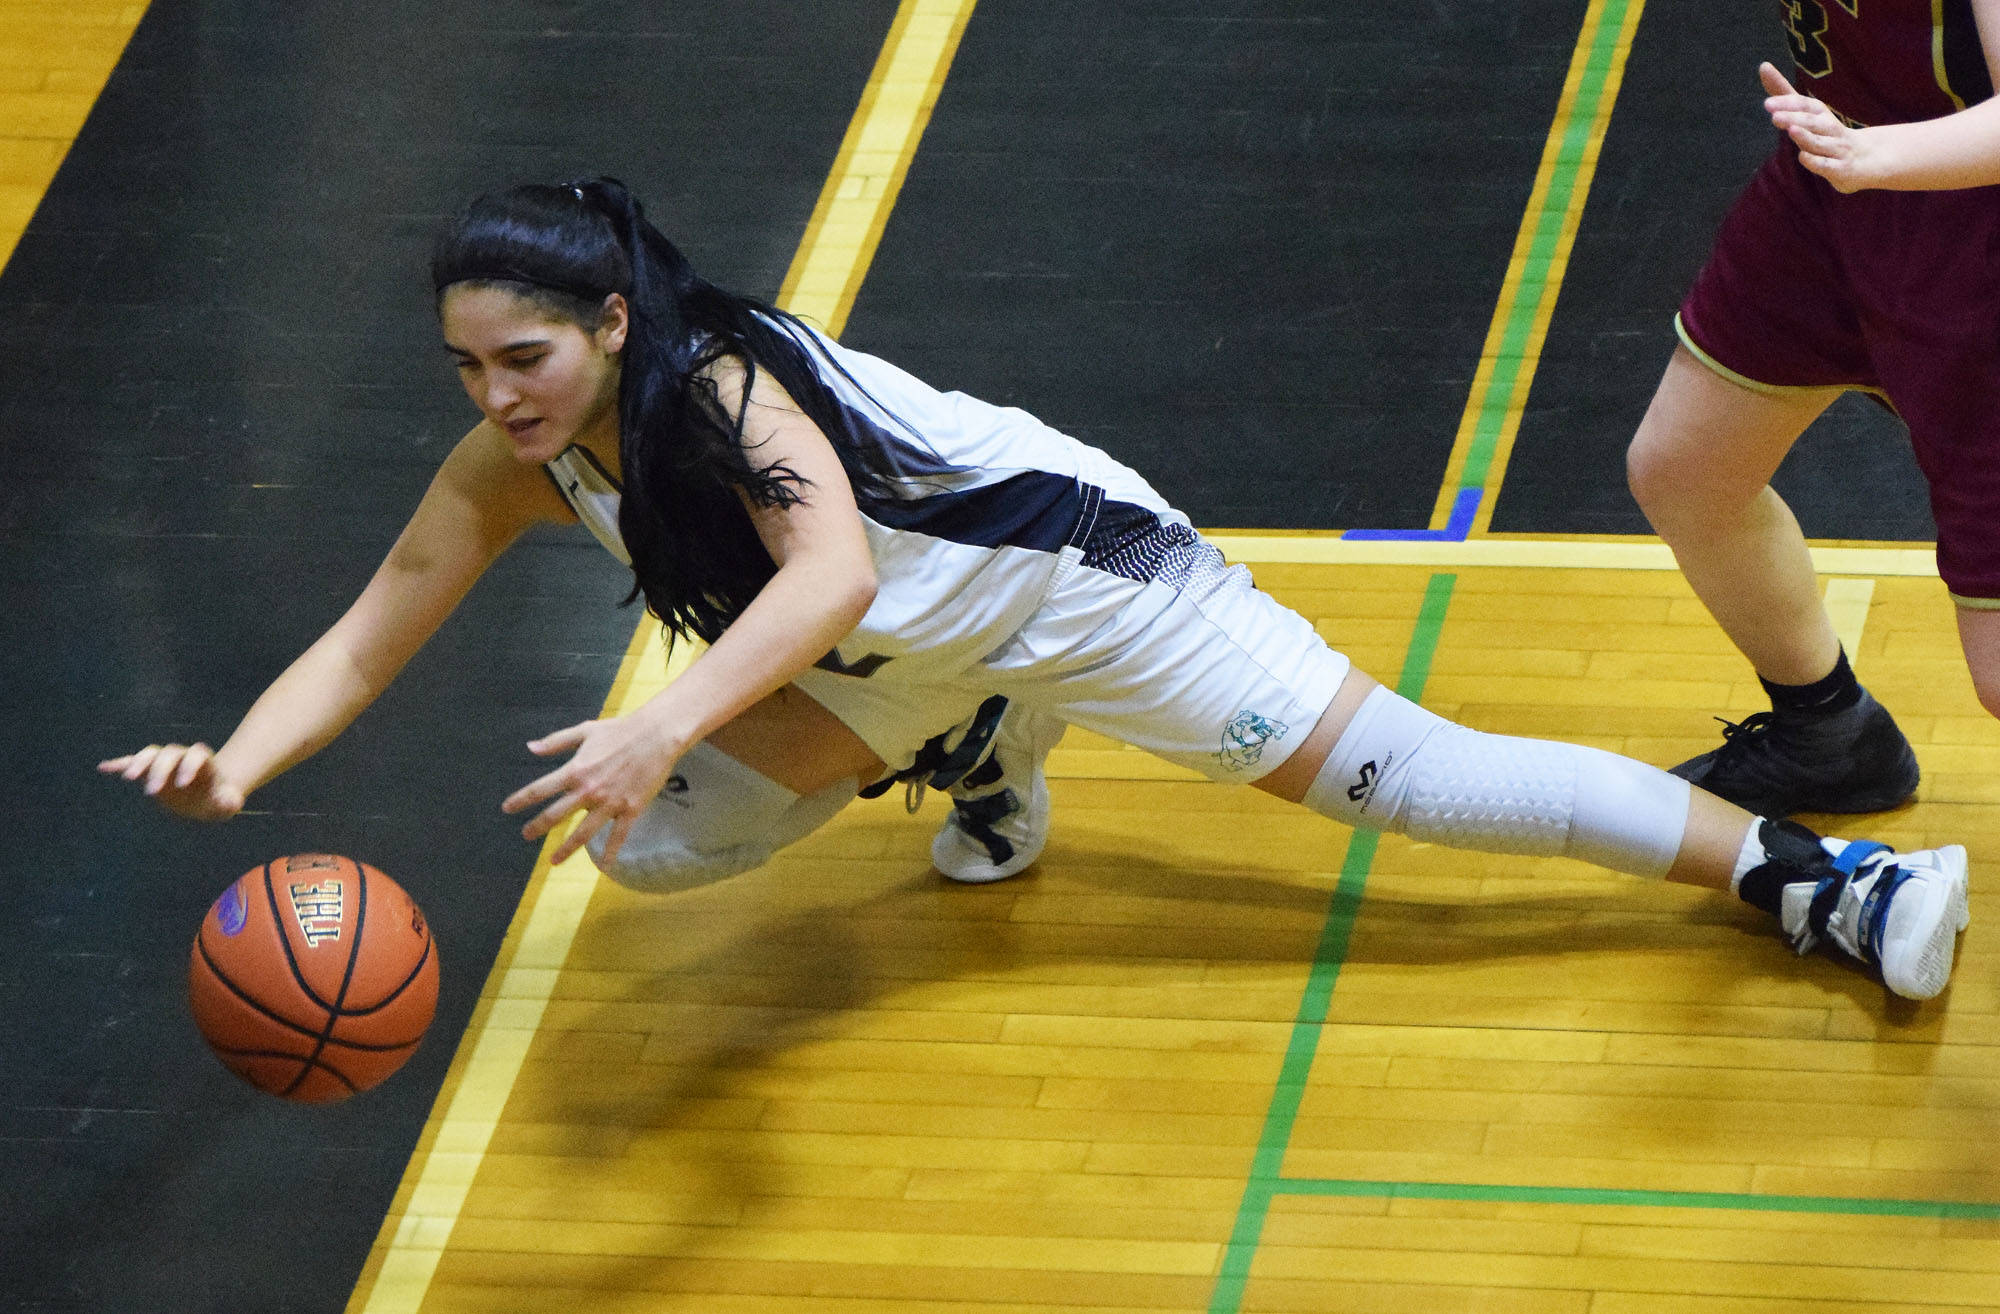 Nikiski’s Brianna Vollertsen dives for a loose ball against Grace Christian, Friday at the Southcentral Conference basketball tournament at Nikiski High School. (Photo by Joey Klecka/Peninsula Clarion)